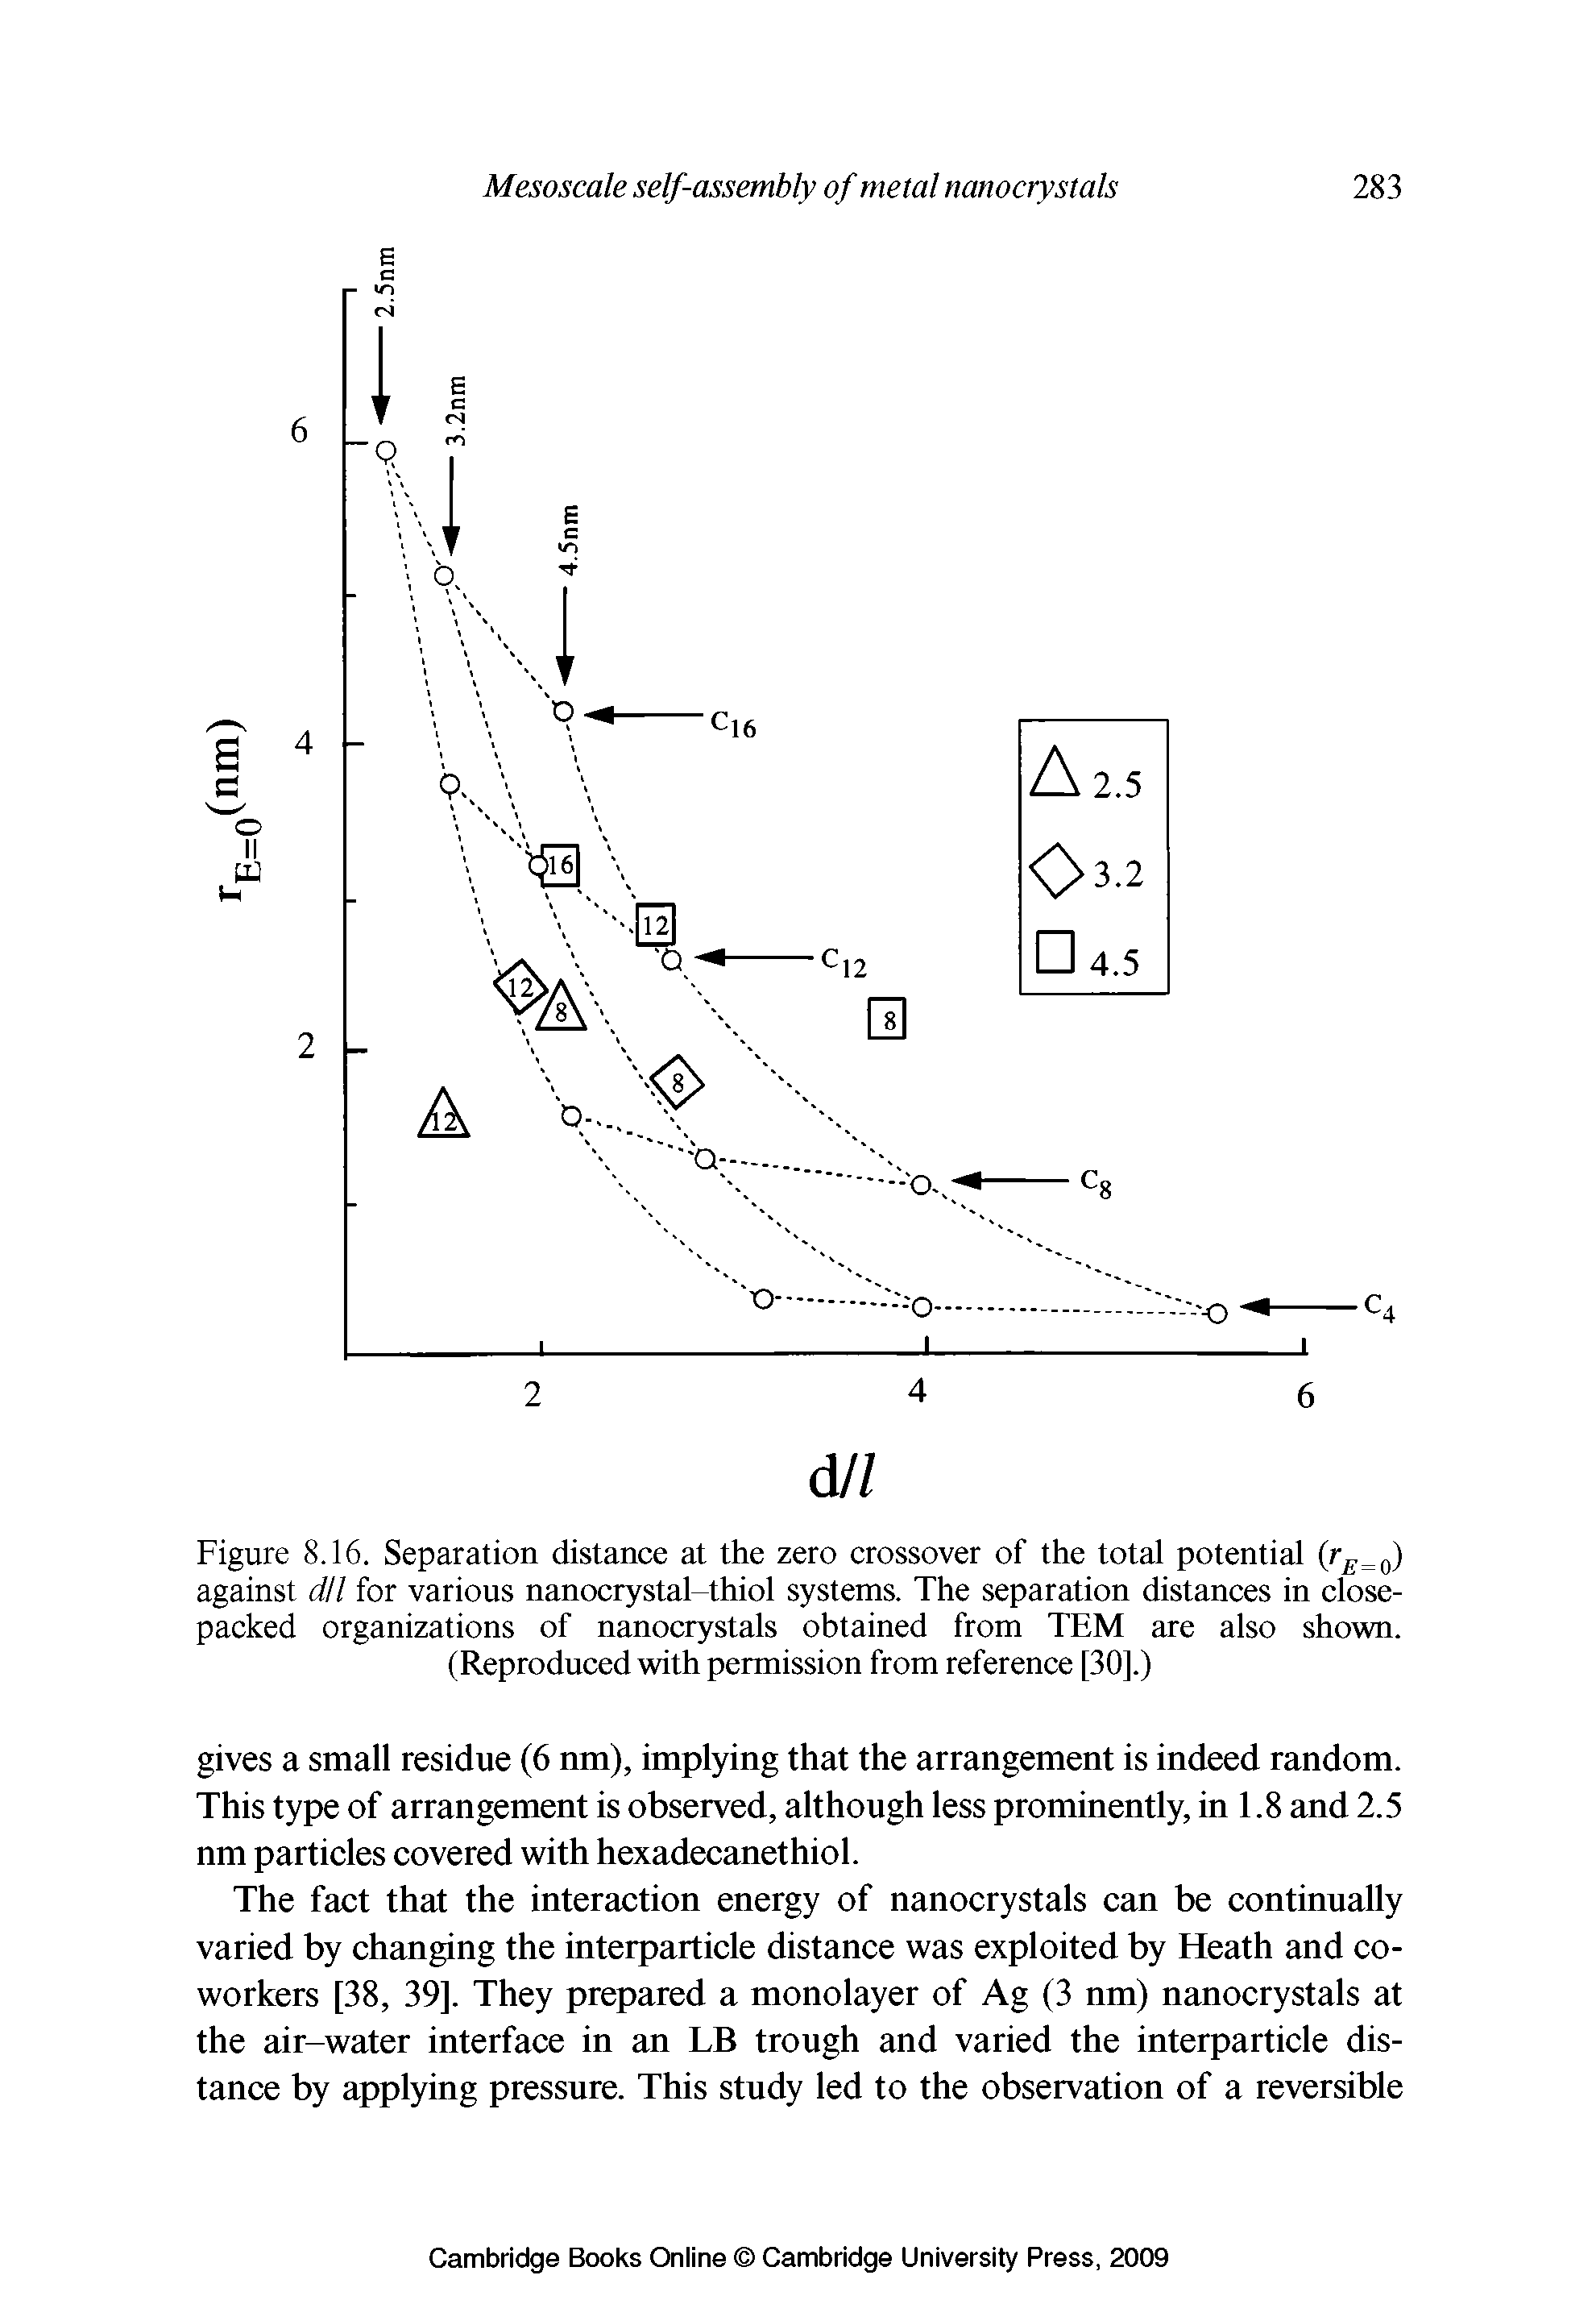 Figure 8.16. Separation distance at the zero crossover of the total potential (rE=0) against dll for various nanocrystal-thiol systems. The separation distances in close-packed organizations of nanocrystals obtained from TEM are also shown. (Reproduced with permission from reference [30].)...